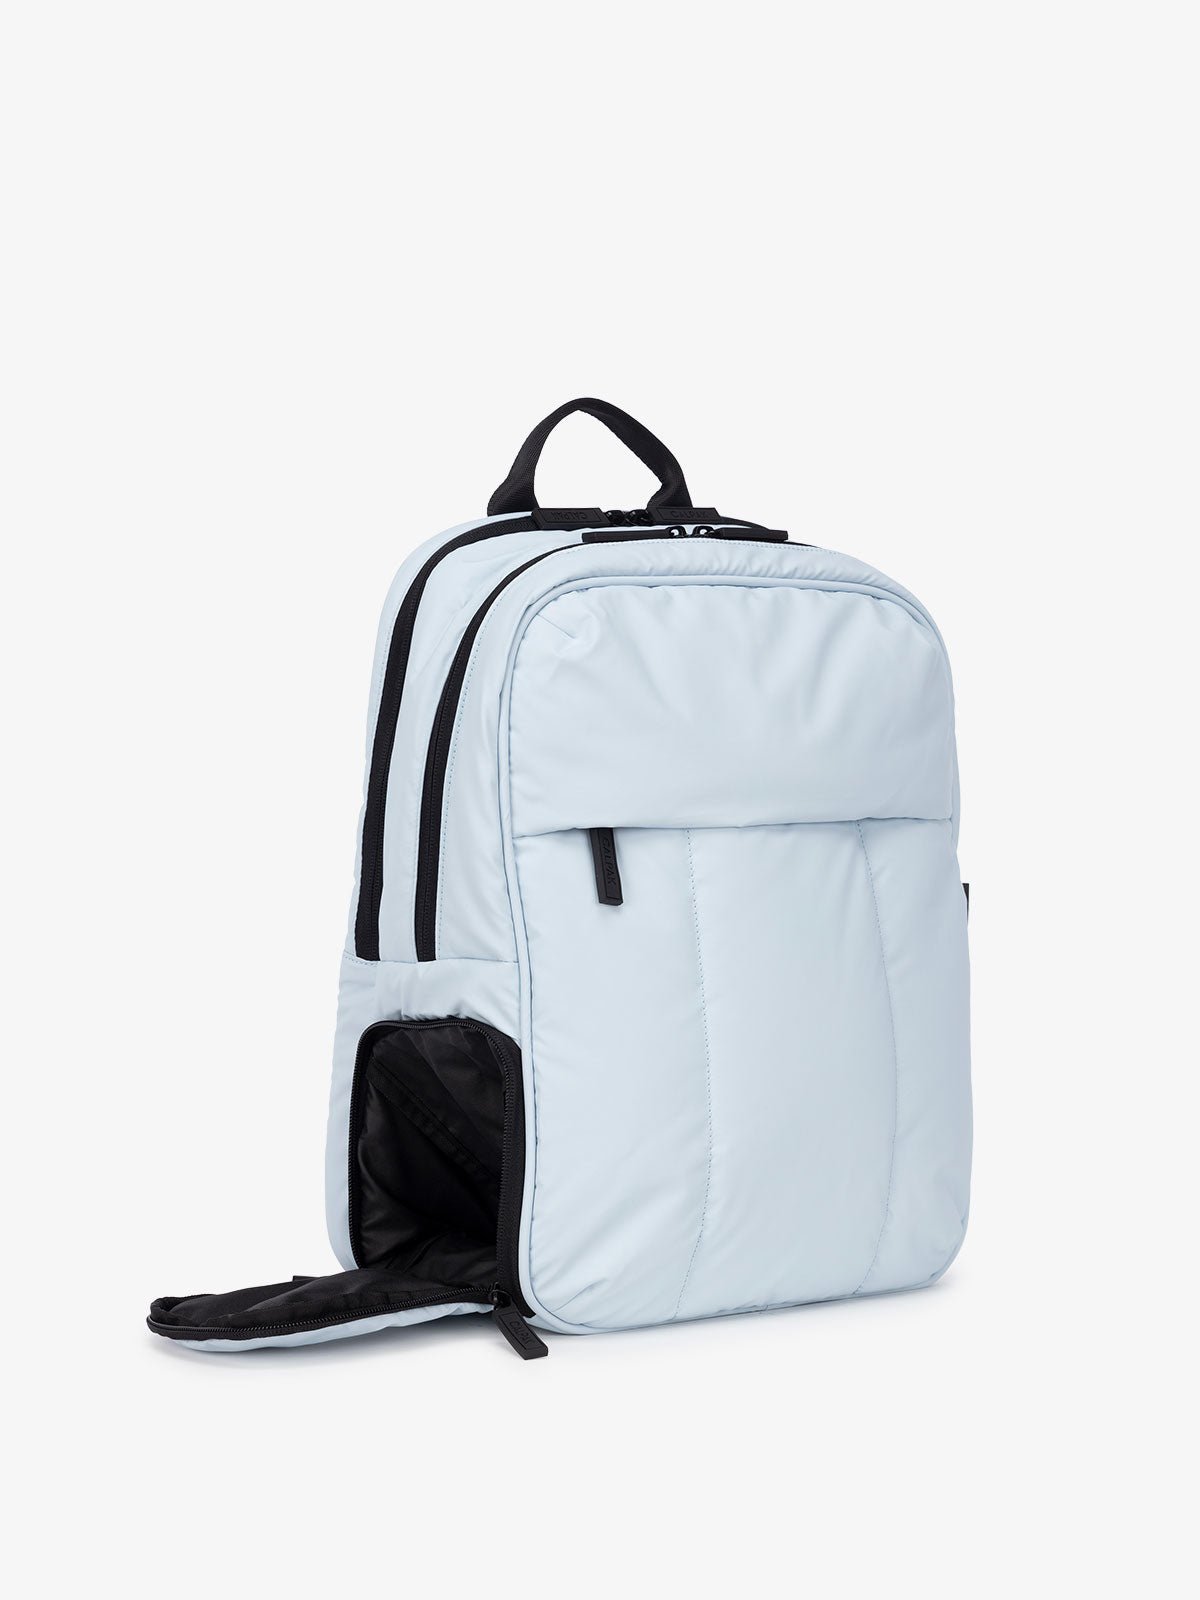 blue travel backpack with laptop sleeve